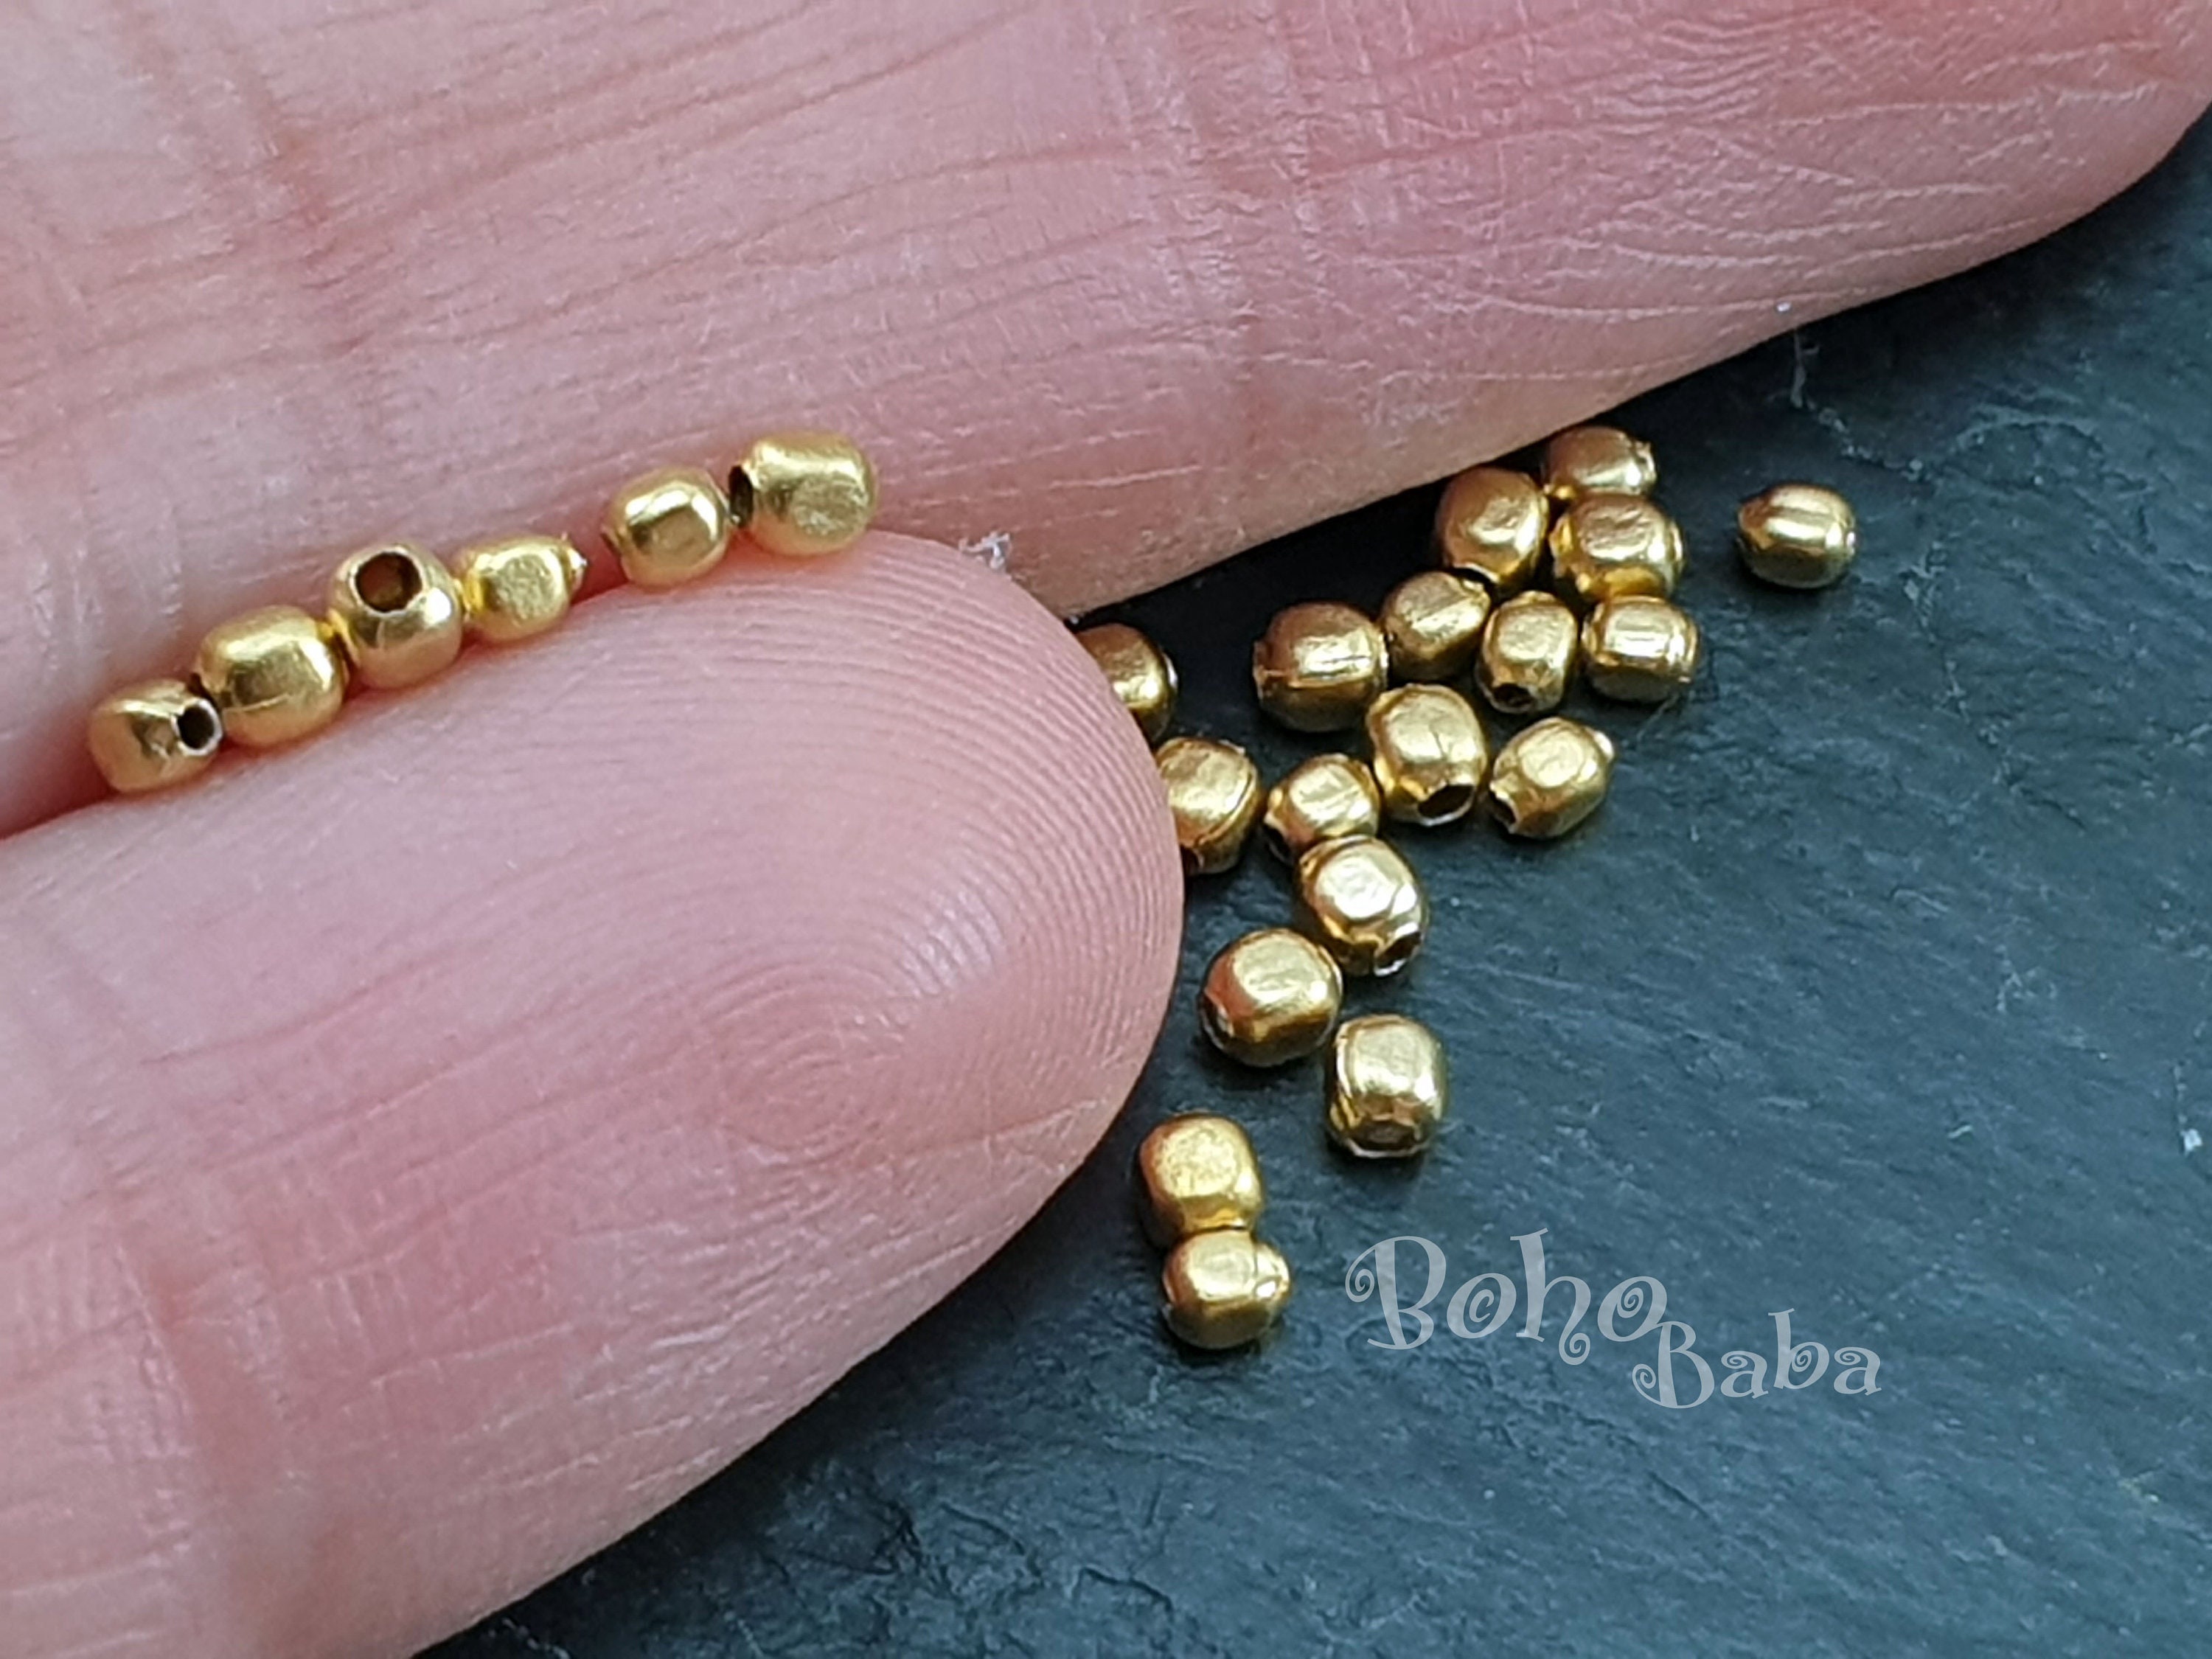 1 Strand Gold Plated Designer Copper Round Beads,Casting Copper Beads,Jewelry  Making Supplies 17mm 8 inches GPC196